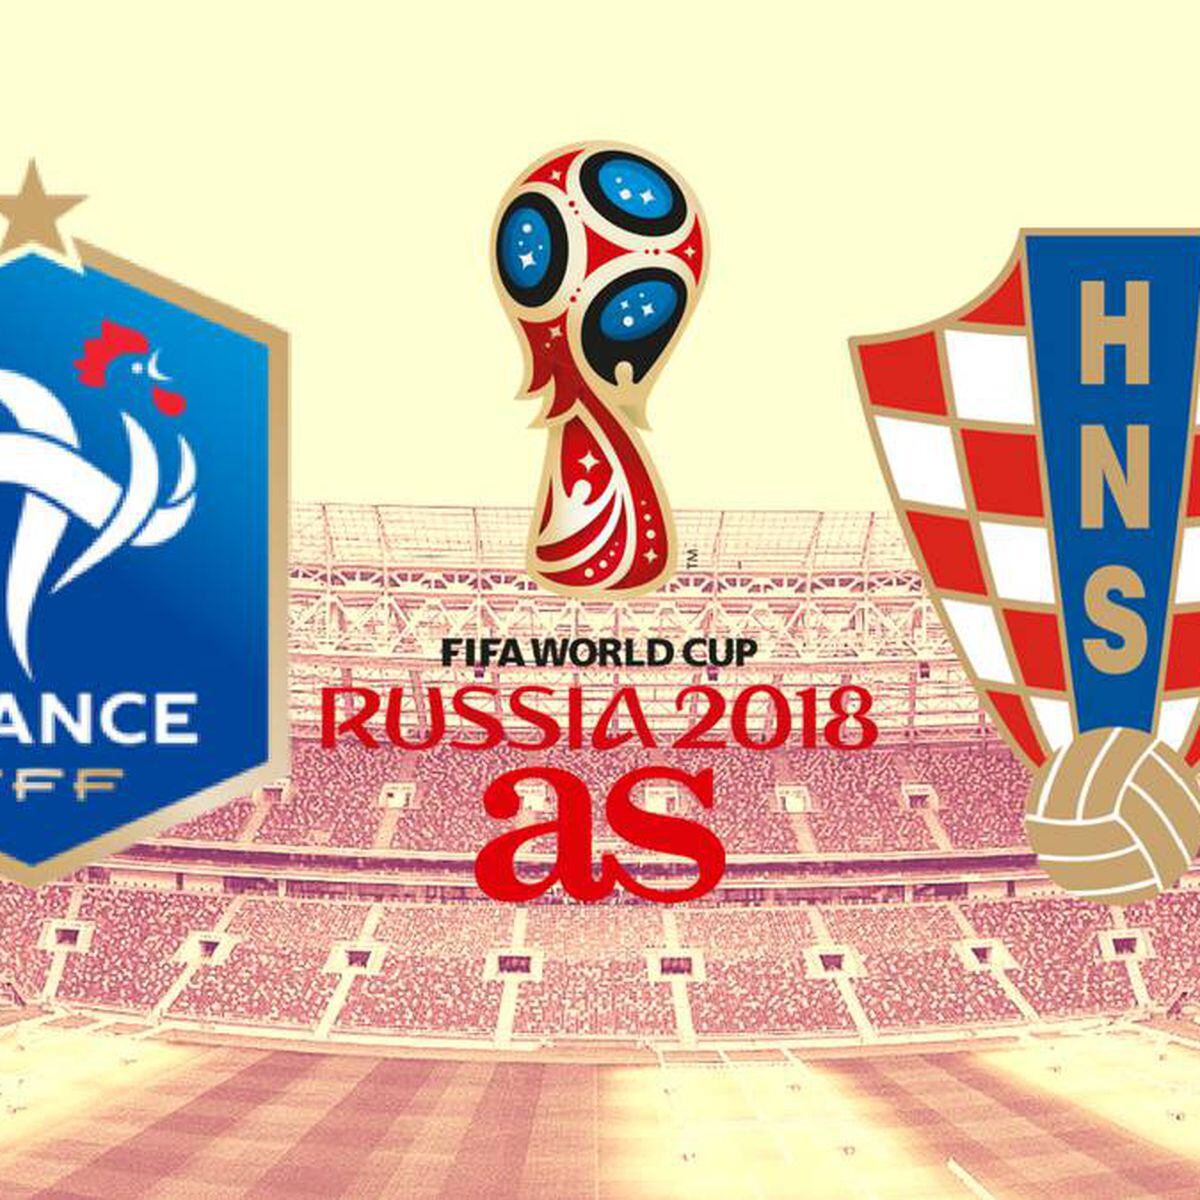 2018 World Cup finals: how to watch France vs. Croatia online - The Verge